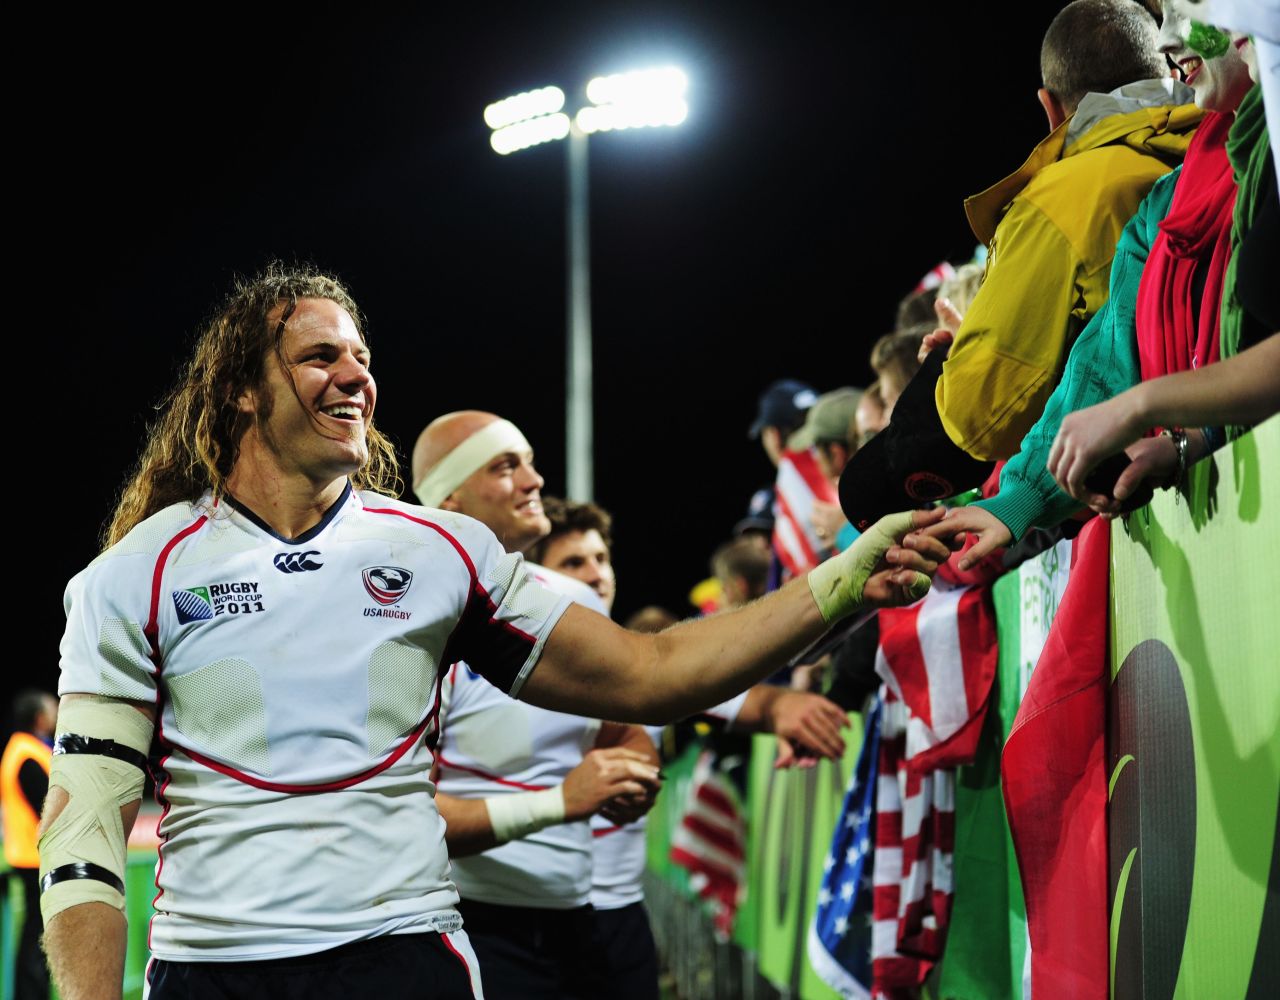 A powerful back-row player, Clever starred in the 2007 and 2011 Rugby World Cups for the USA, but was controversially omitted from the 2015 squad.